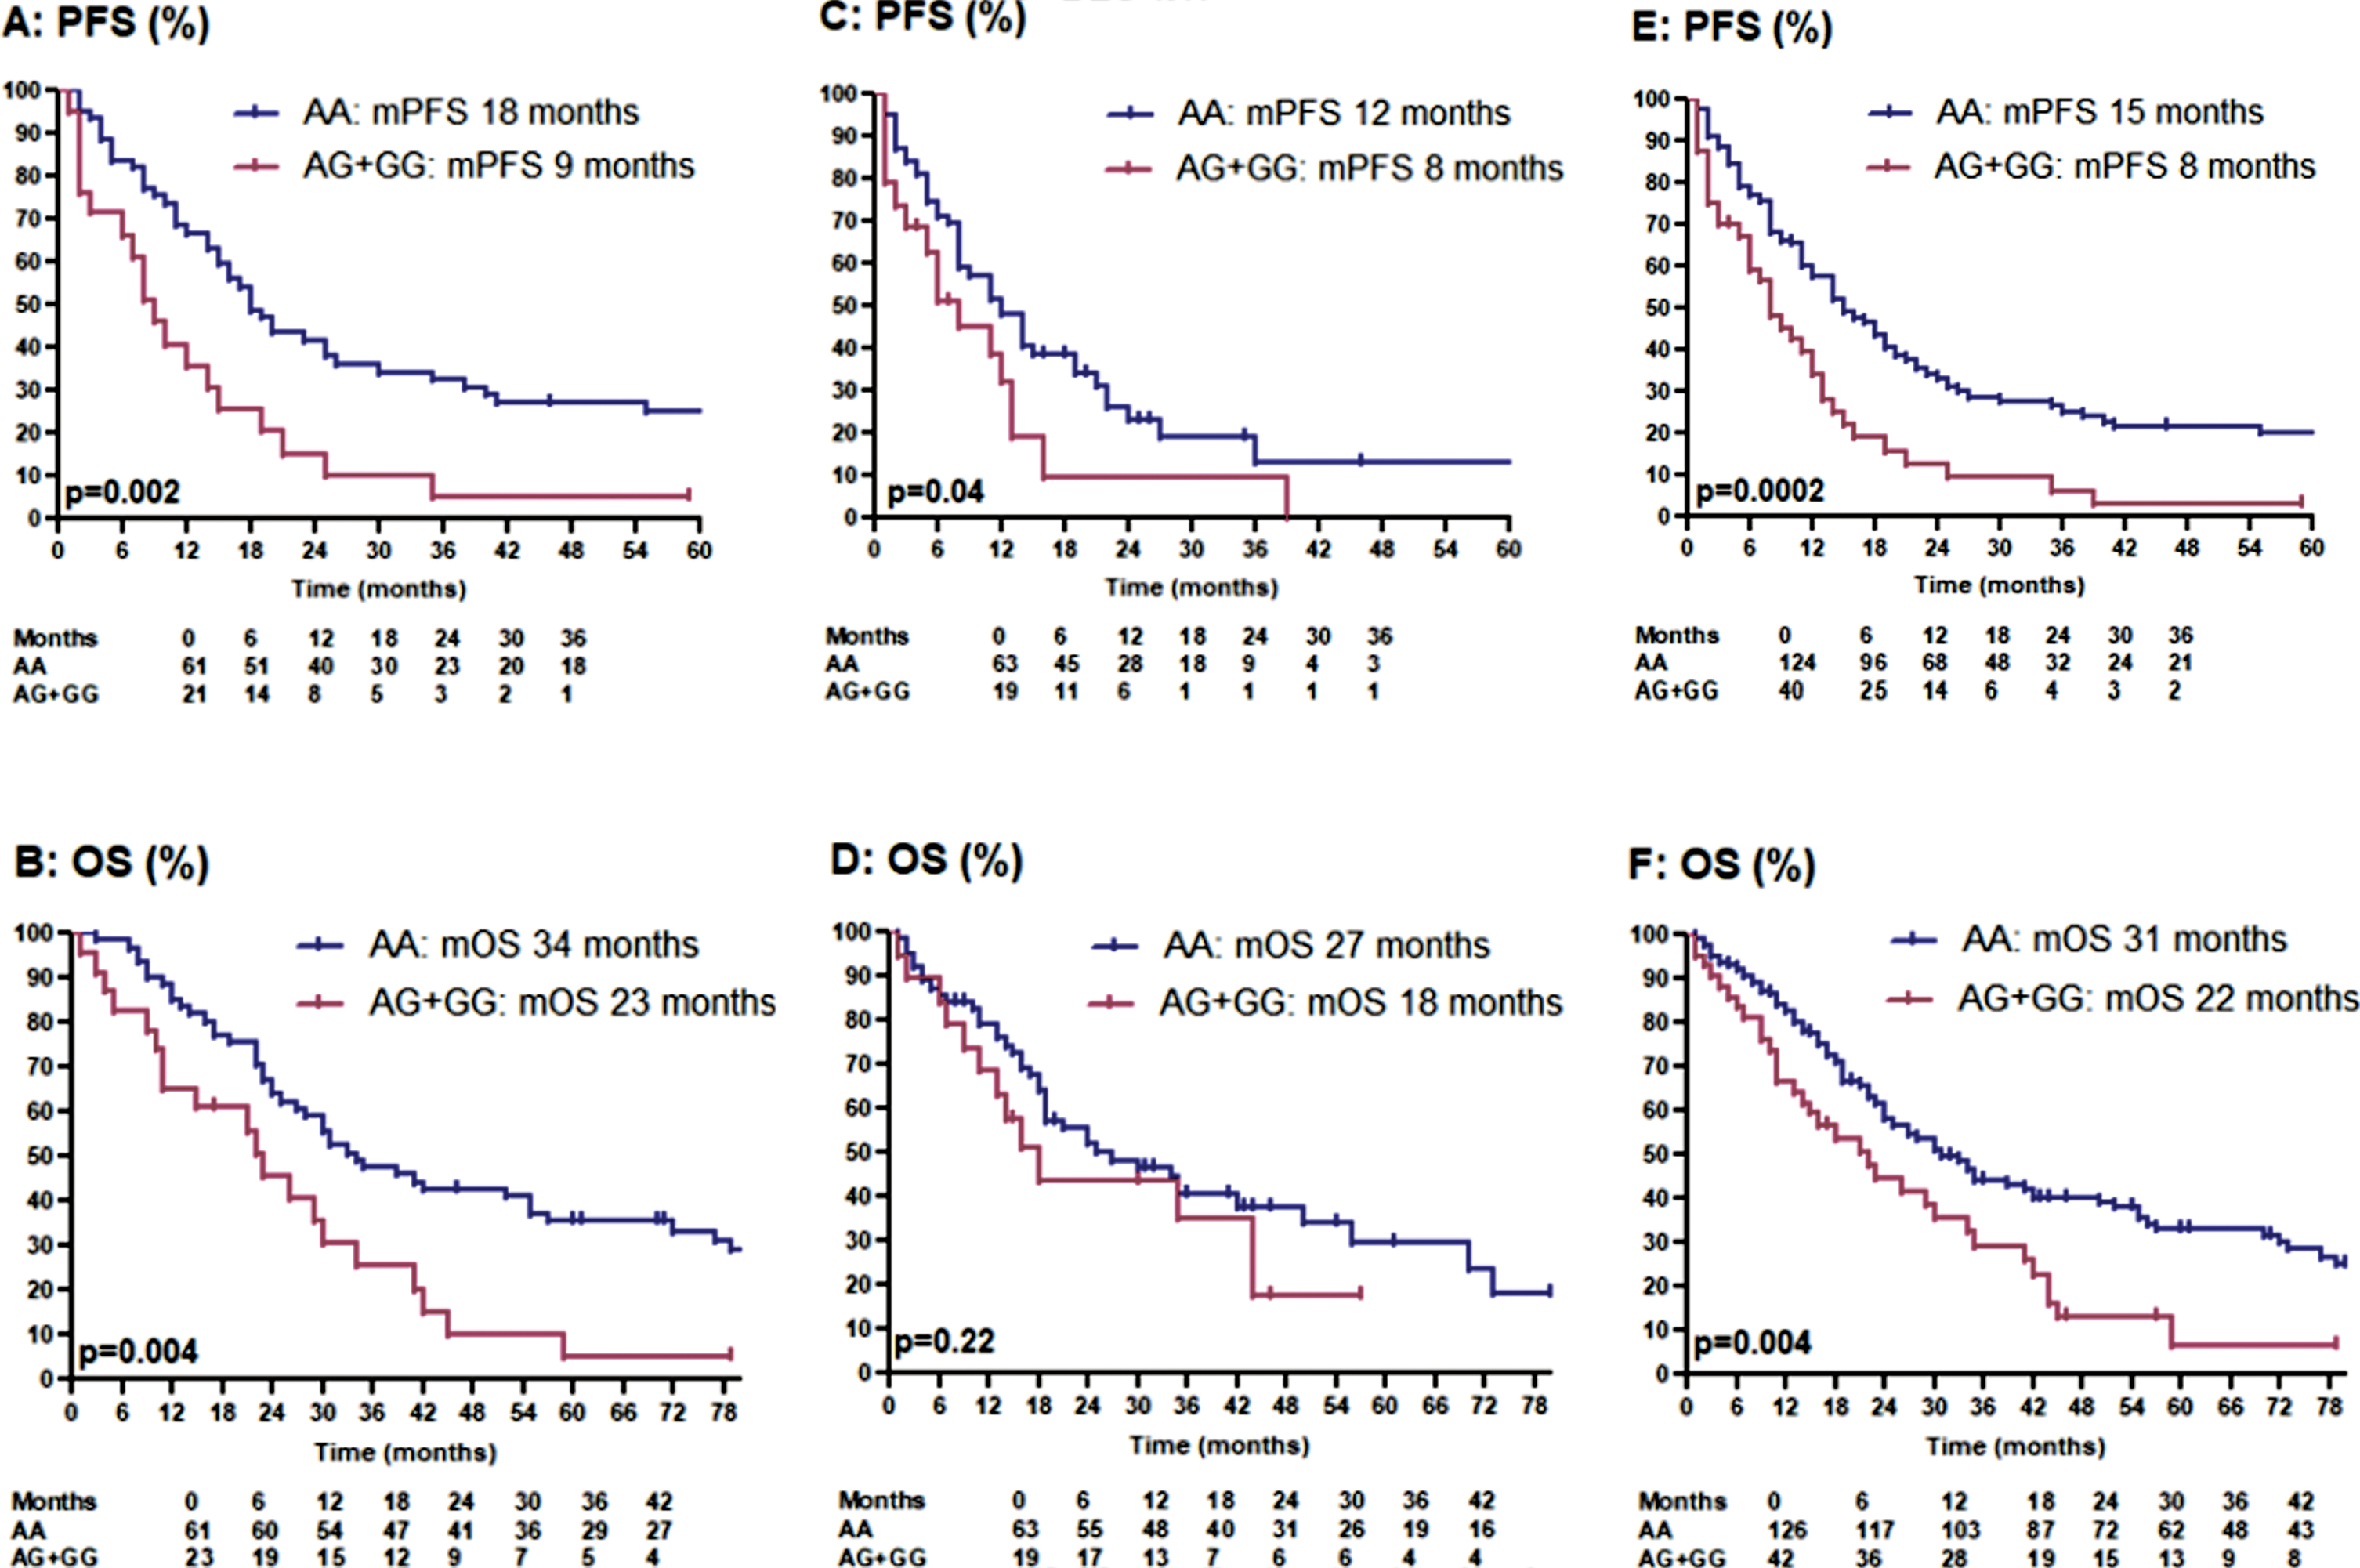 Kaplan-meier estimates for progression-free survival and overal survival in patients treated with first-line sunitinib: panel A + B: discovery cohort. panel C + D: validation cohort. panel E + F: total cohort.